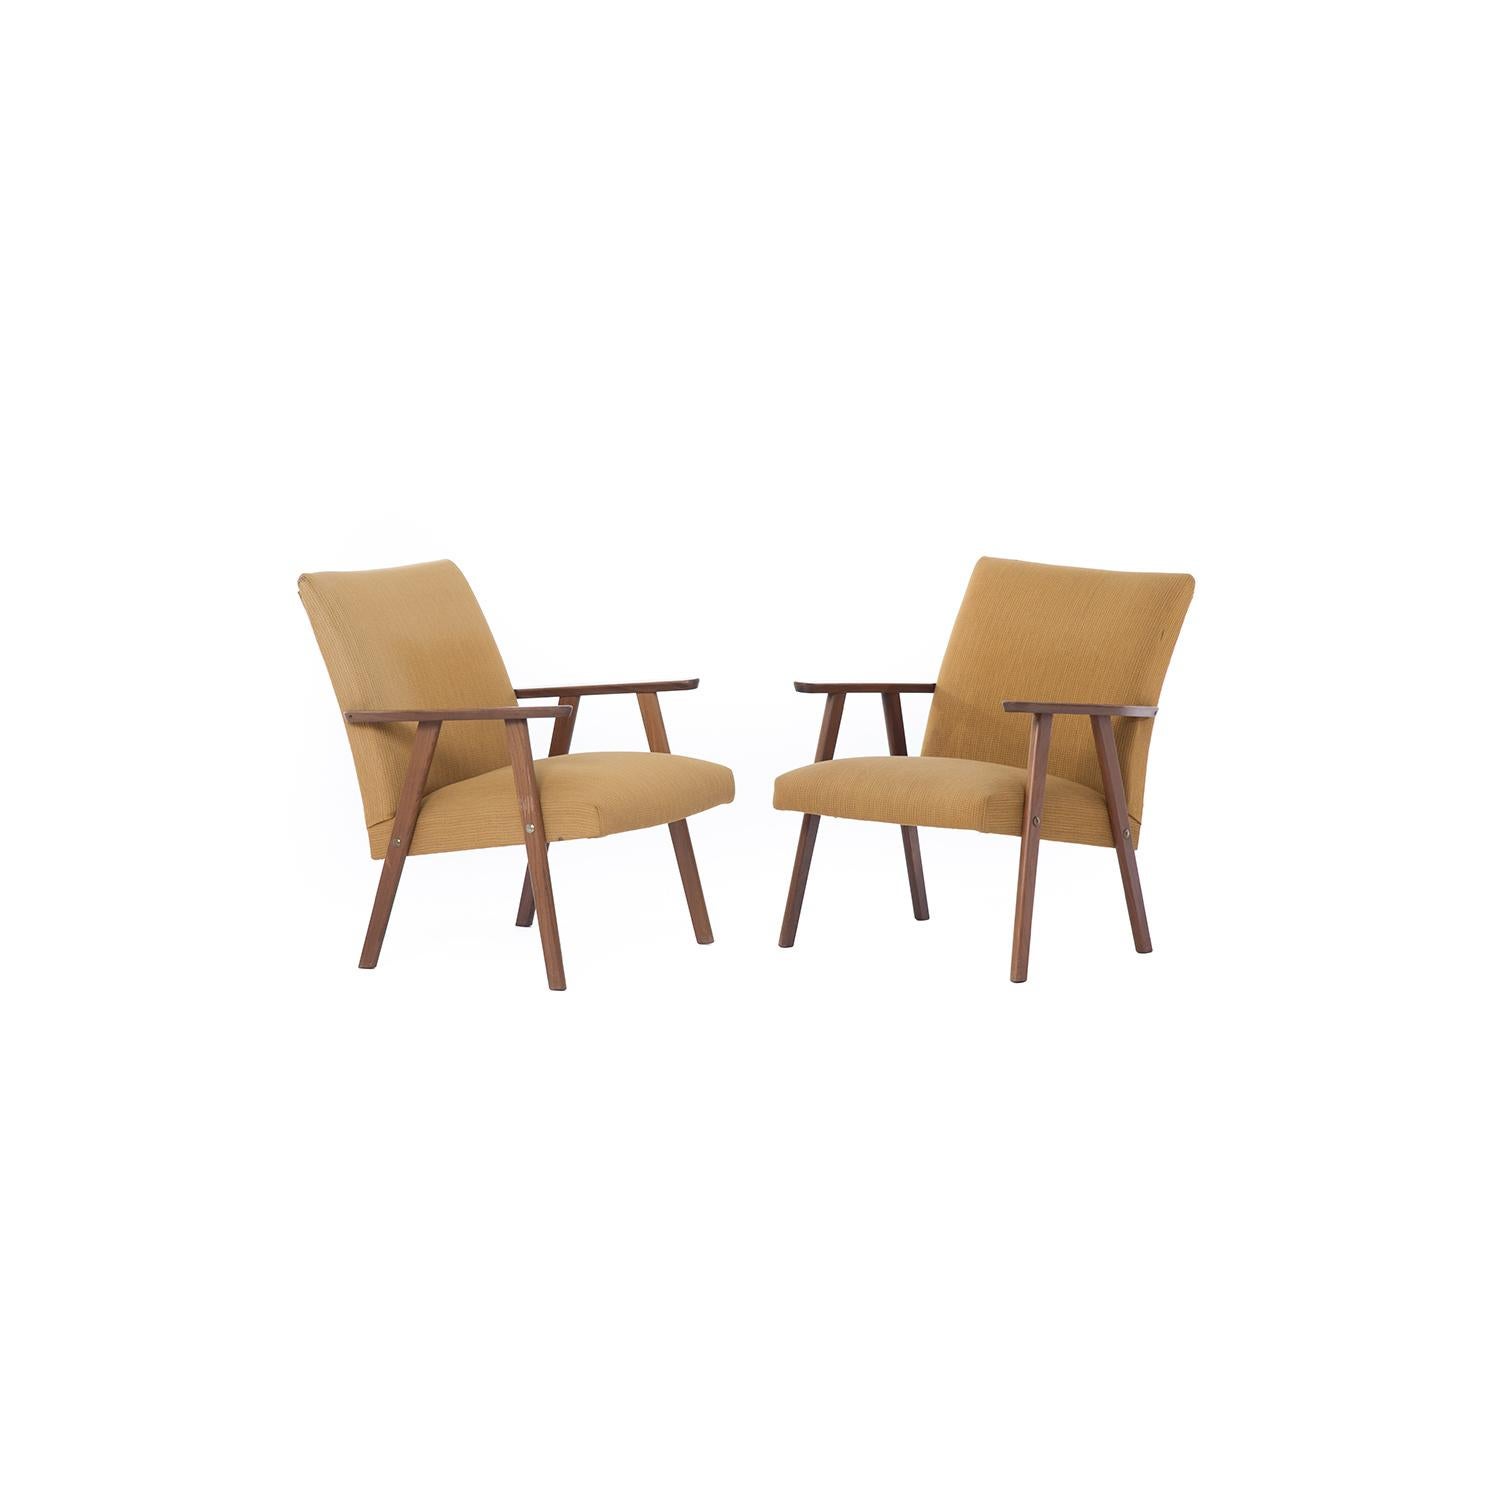 These teak lounge chairs feature a minimal frame, exposed hardware, and a fully upholstered seat/back. Original wool upholstery in very good condition.